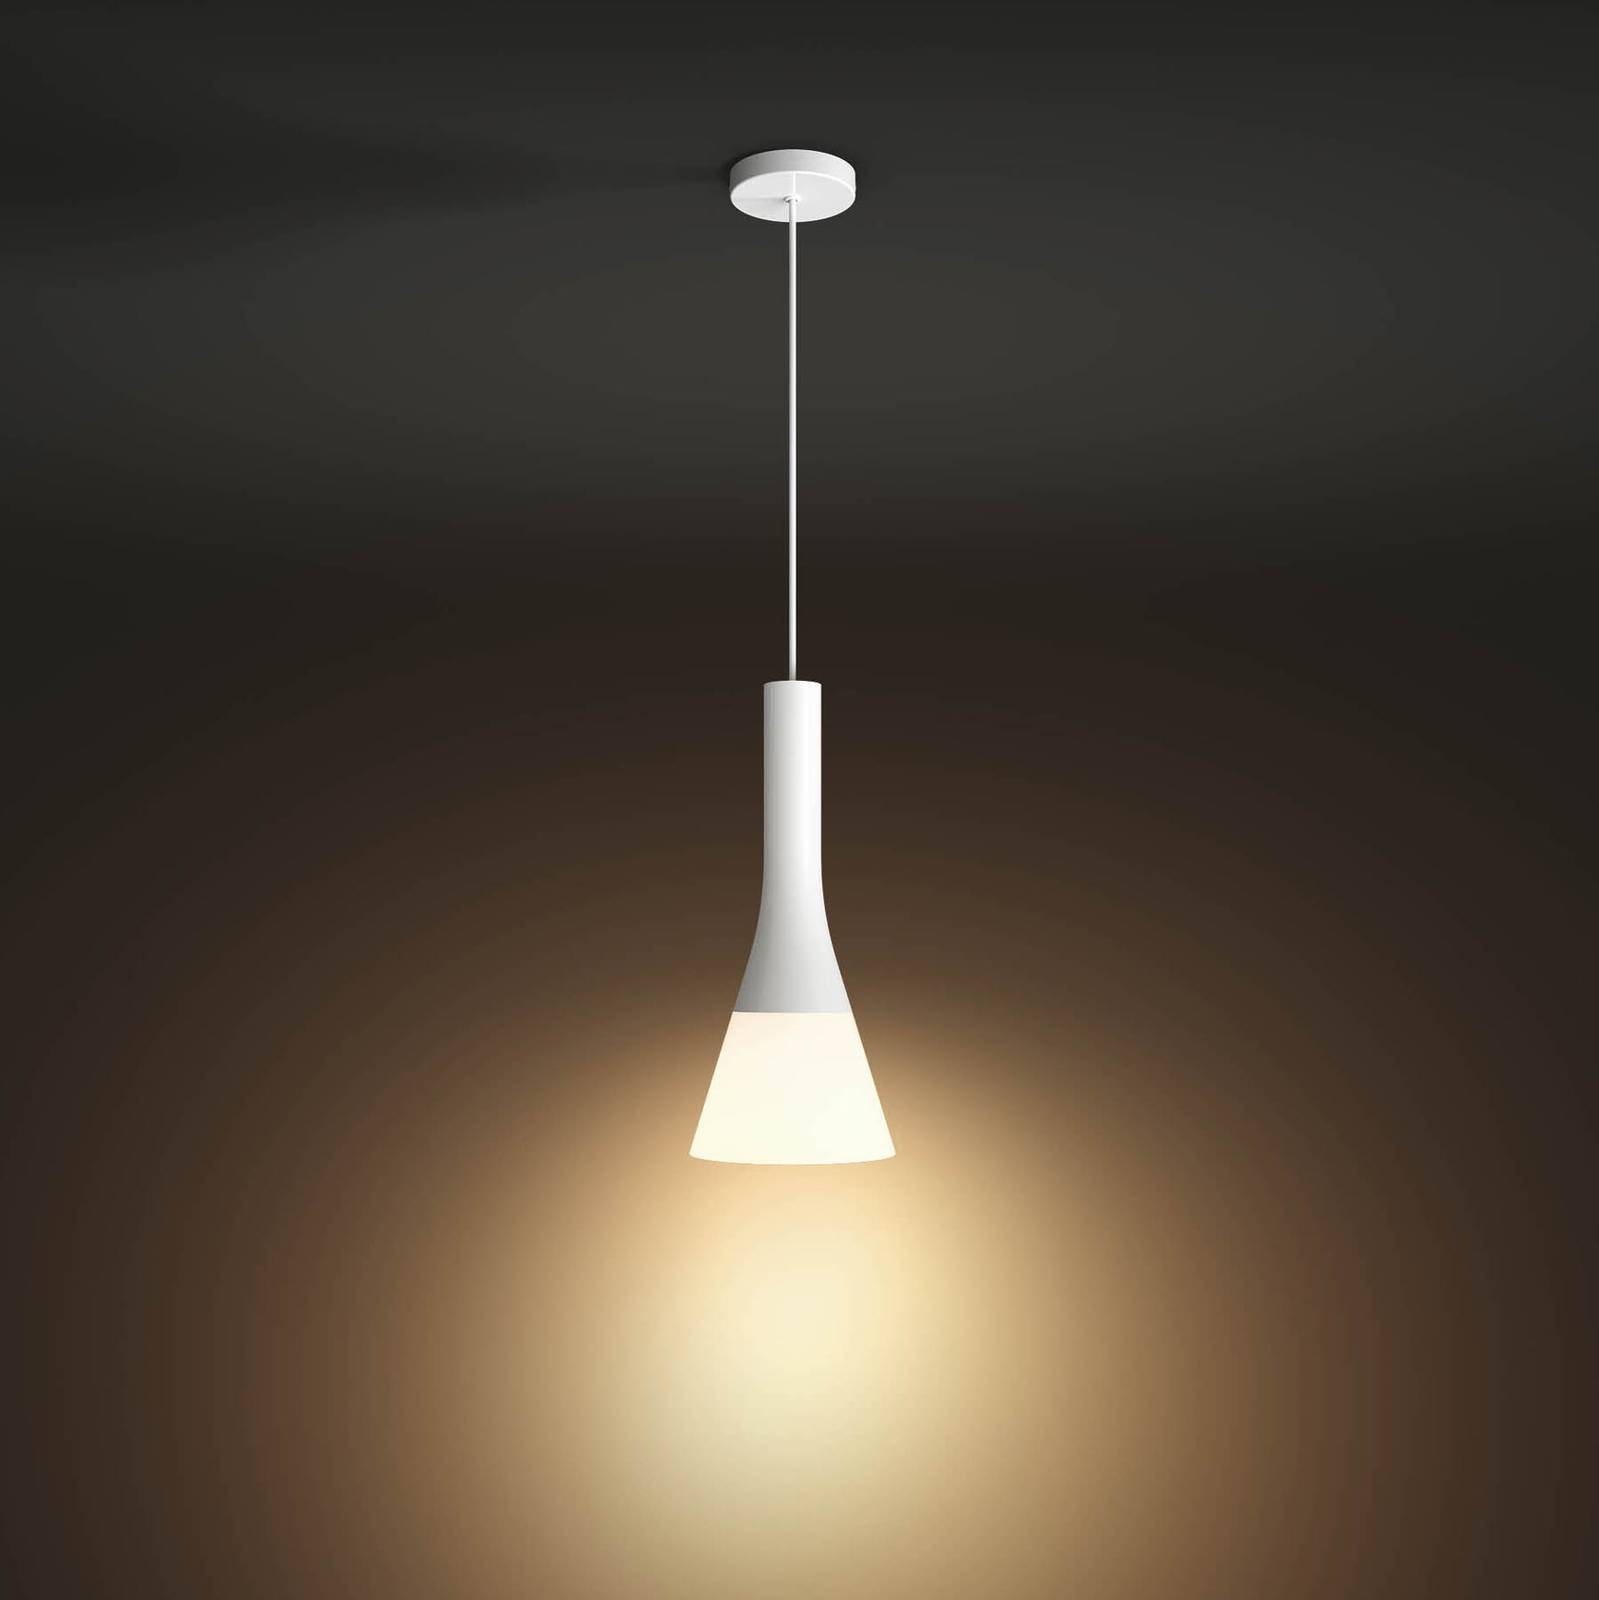 Philips Hue White Ambiance suspension variateur